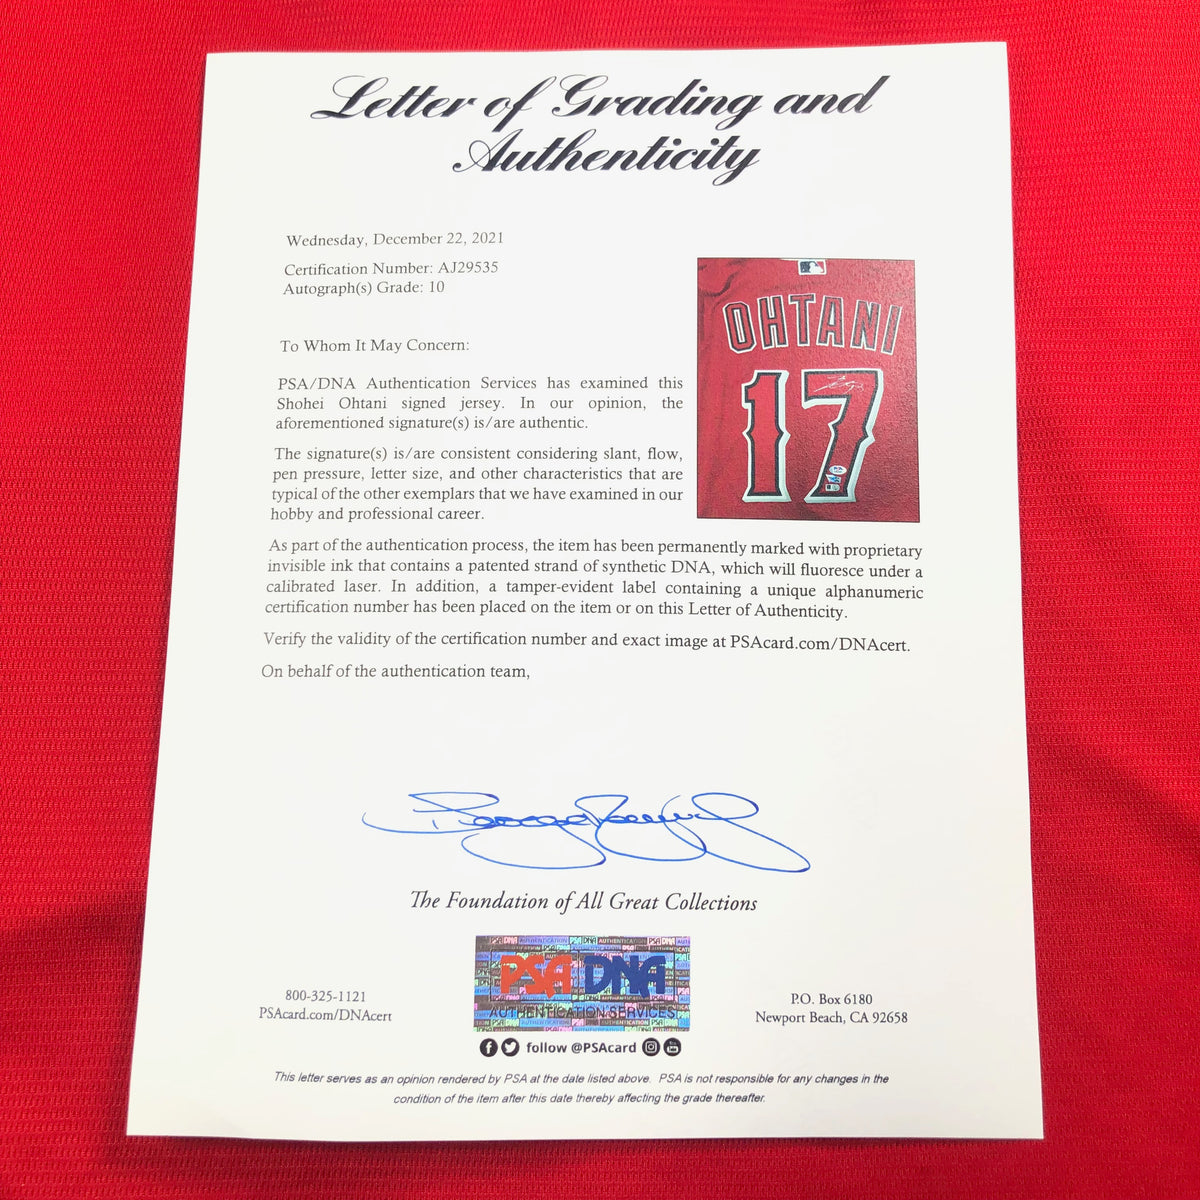 Shohei Ohtani Autographed and Framed Los Angeles Angels Jersey